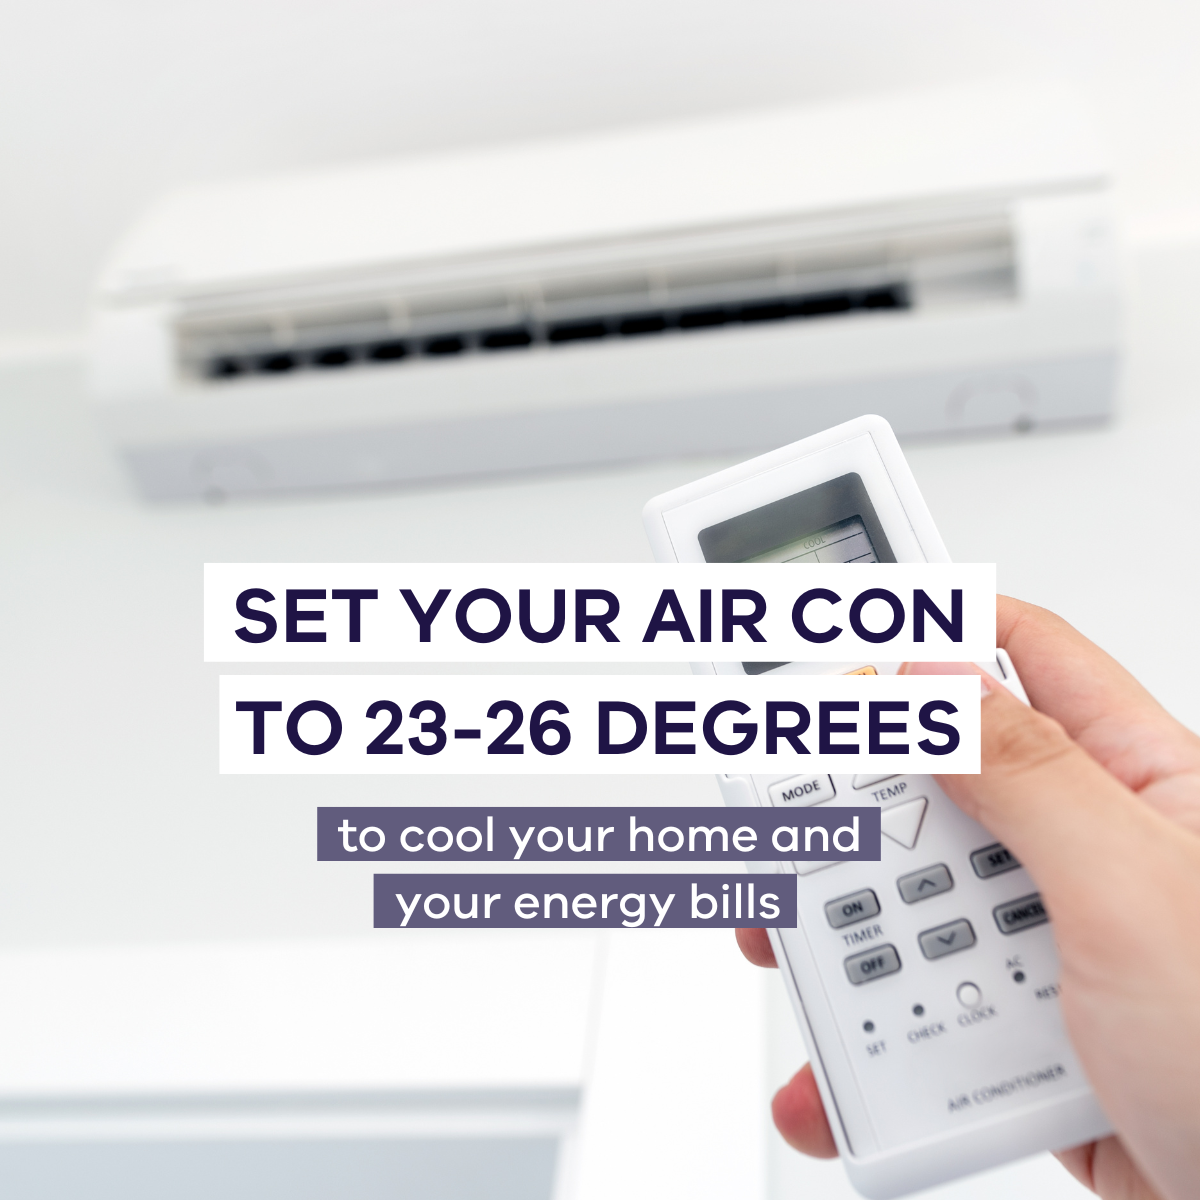 Air conditoner with text set your air conditioner between 23 to 26 degrees to cool your home and your energy bills